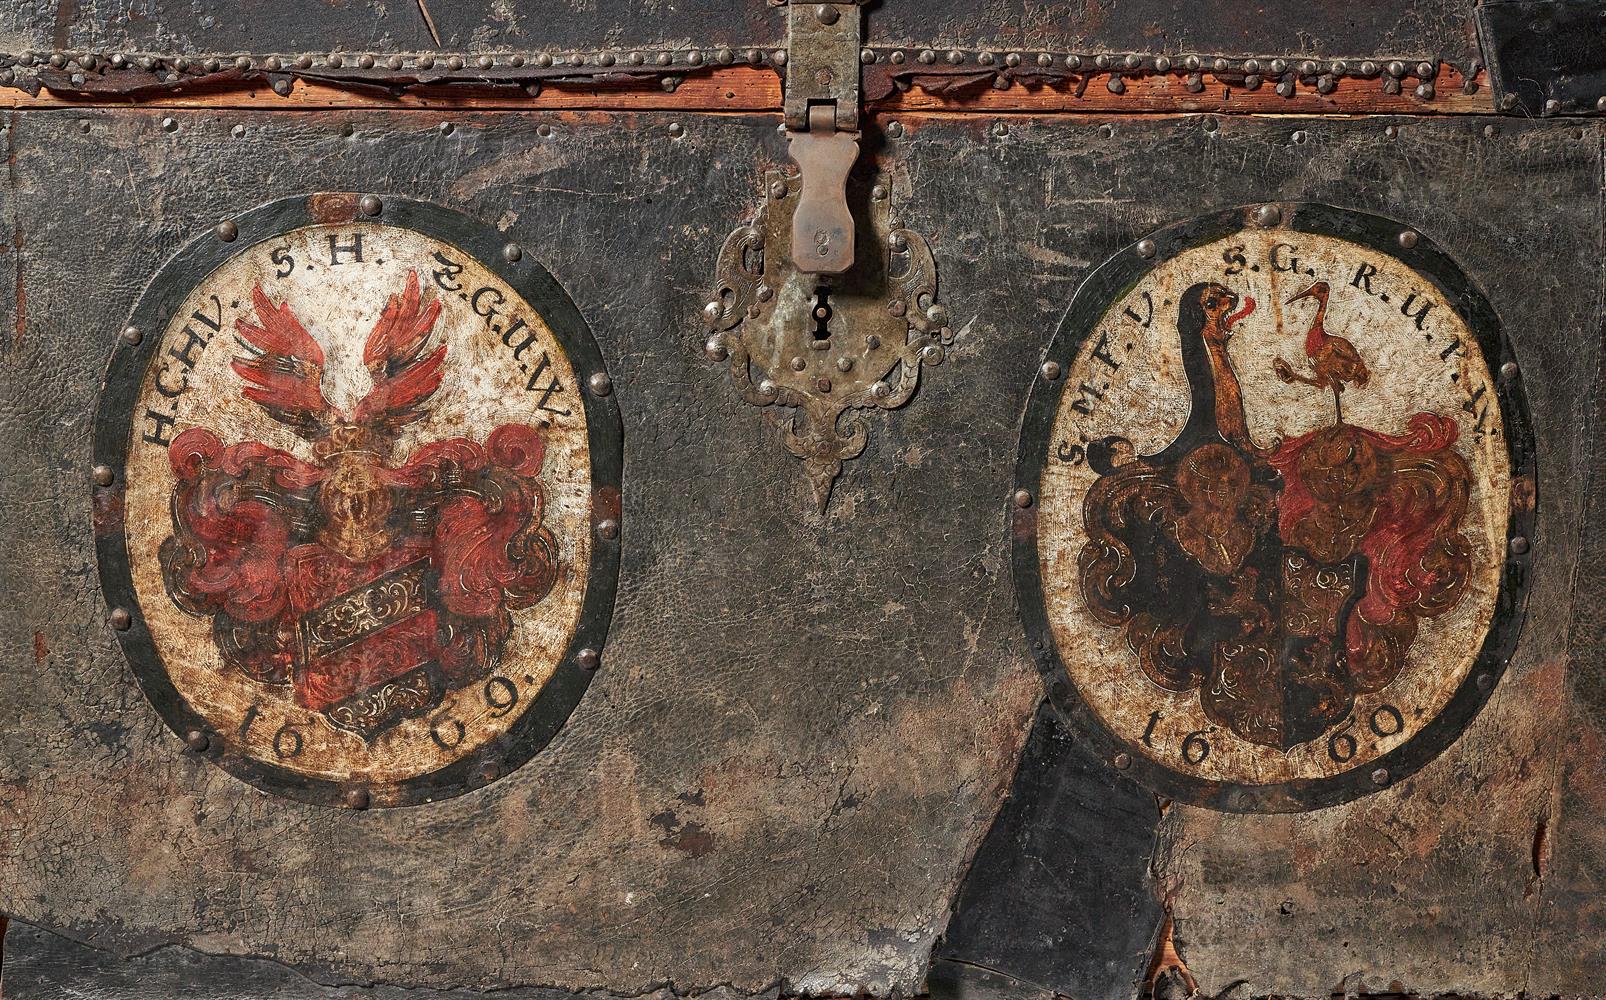 A PAIR OF GERMAN IRON MOUNTED LEATHER CHESTS, LATE 17TH CENTURY - Image 3 of 6